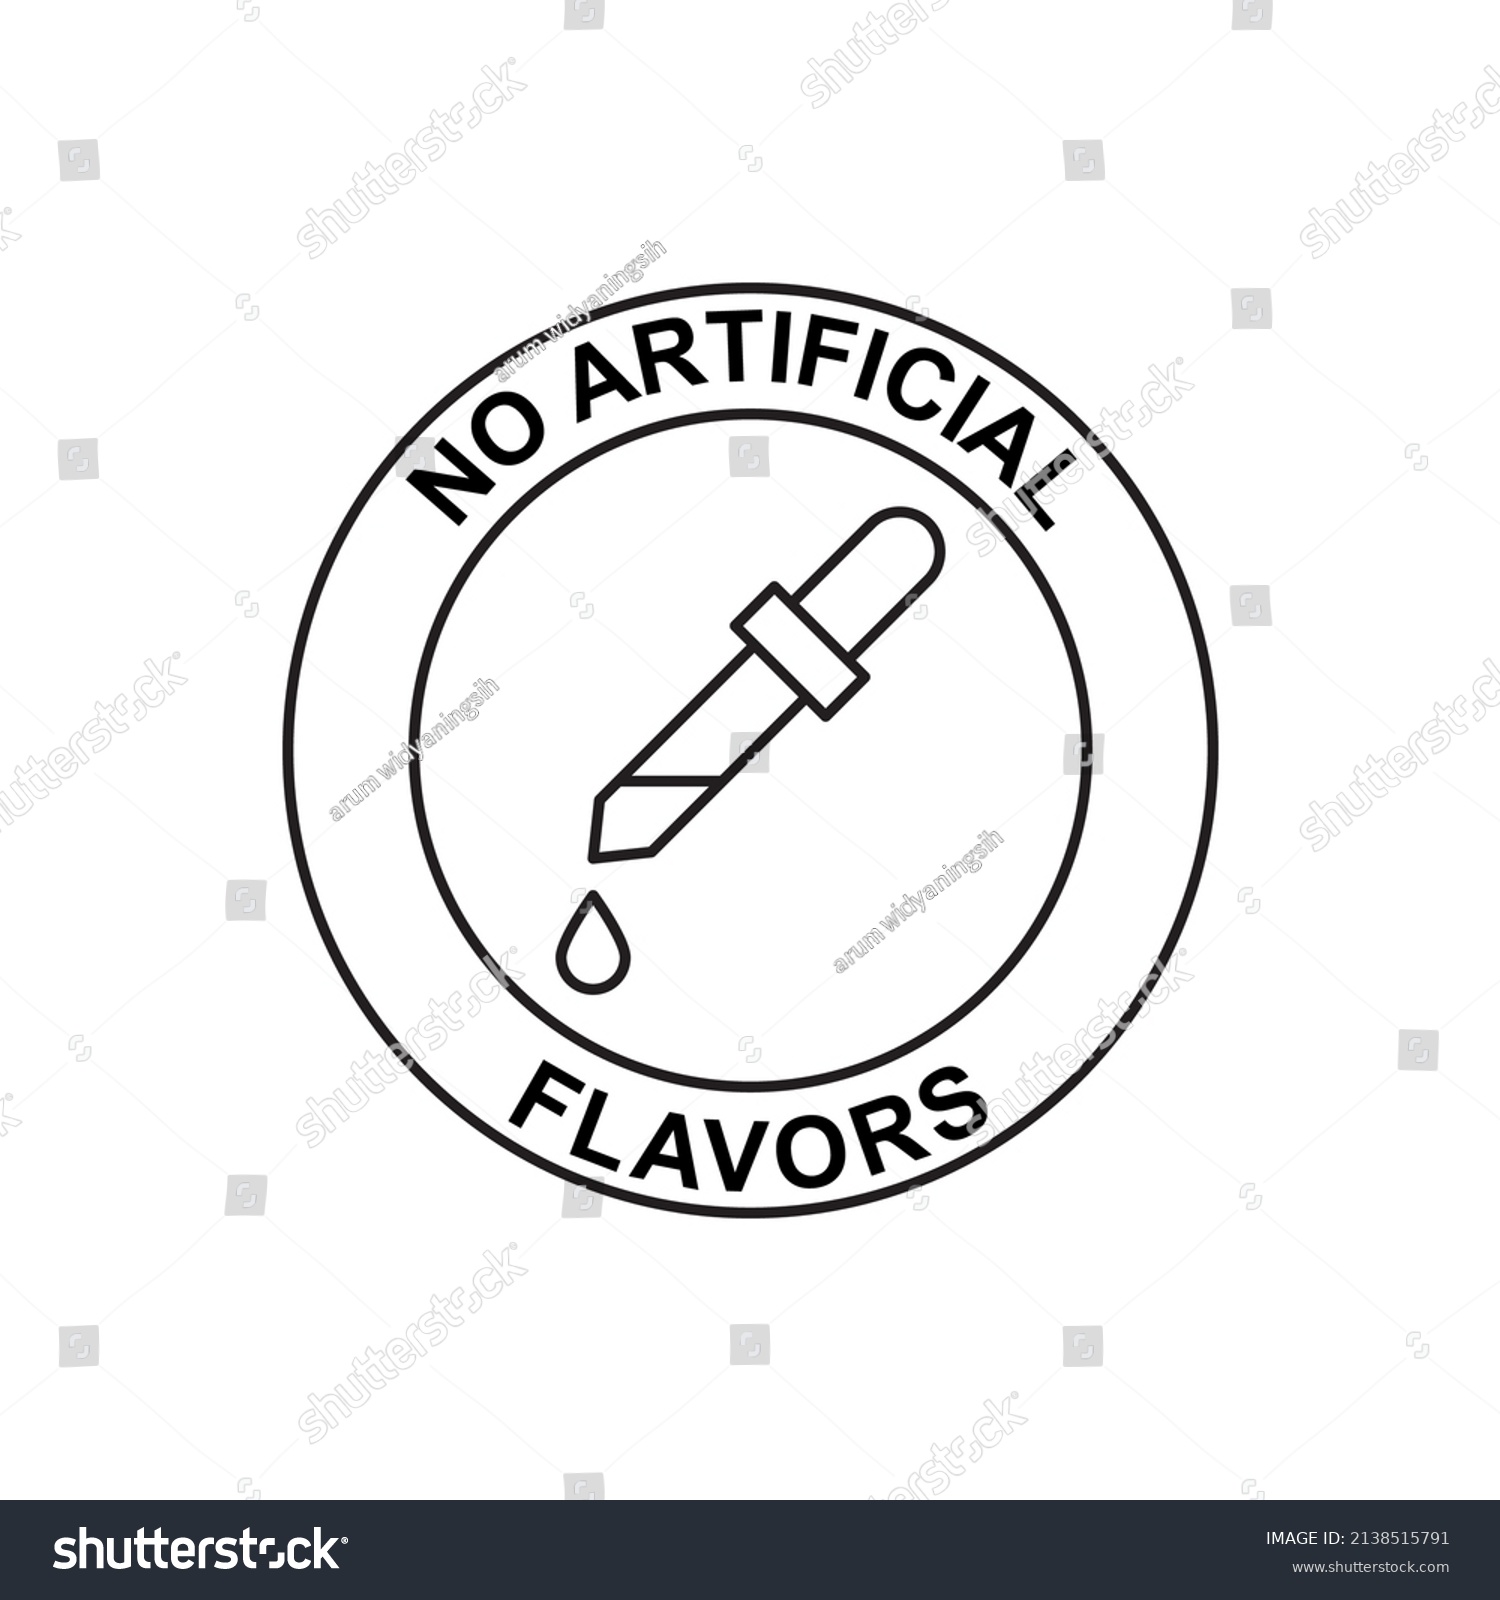 SVG of No artificial flavors Label icon in black line style icon, style isolated on white background svg